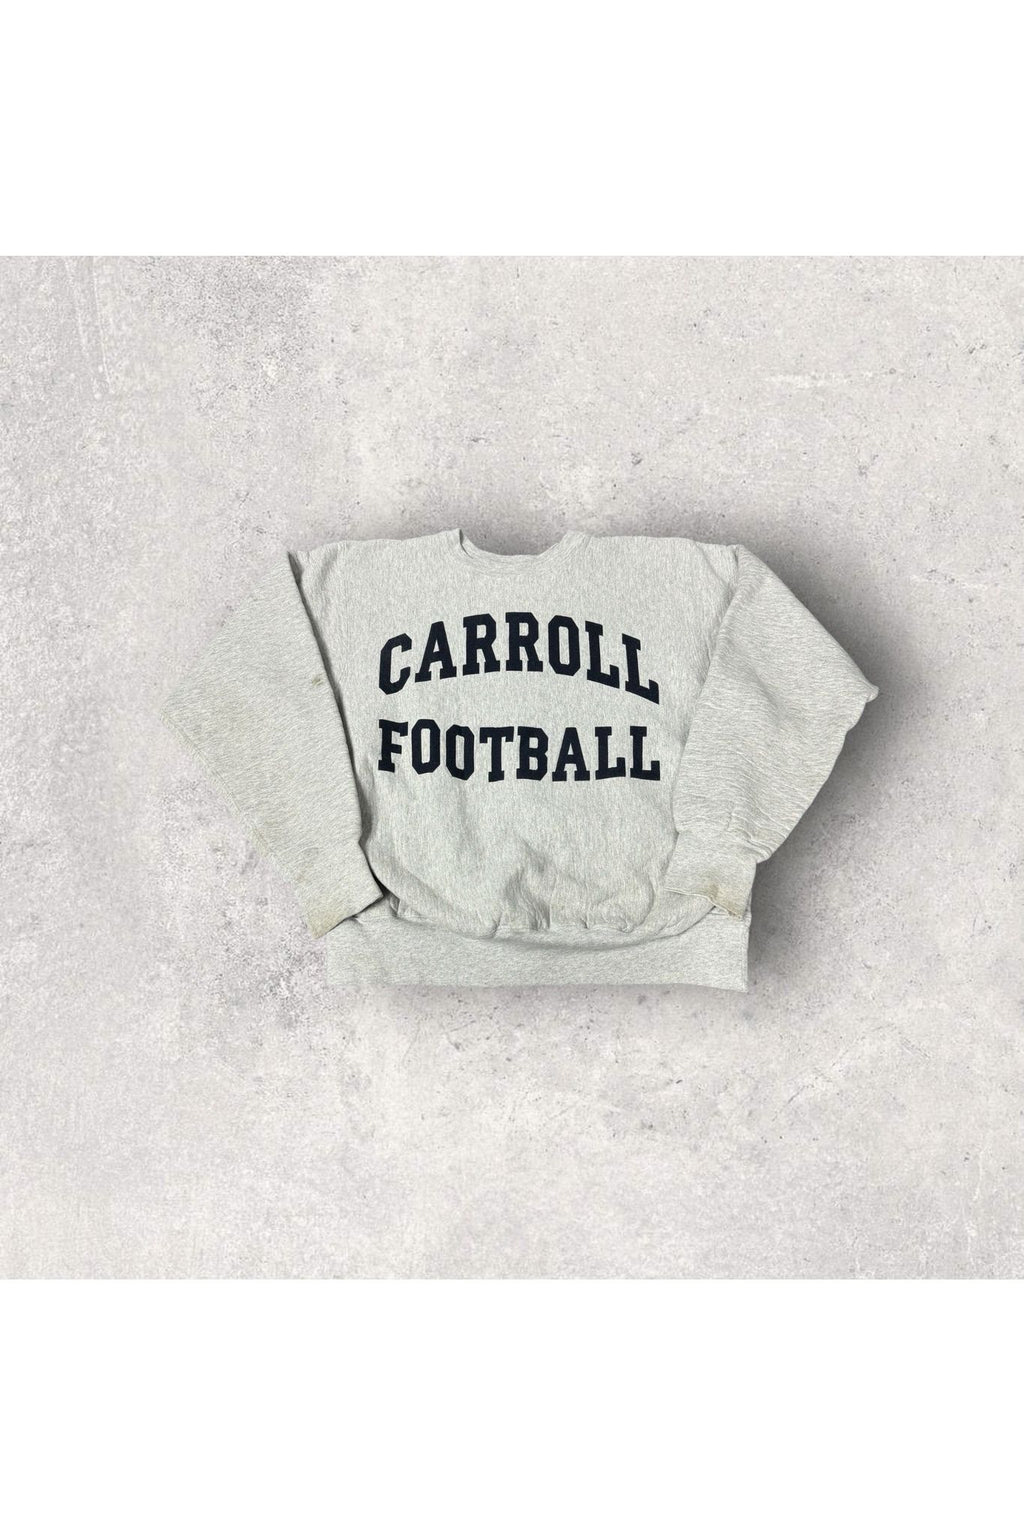 Vintage The Cotton Exchange Made In USA Carroll Football Crewneck- XL